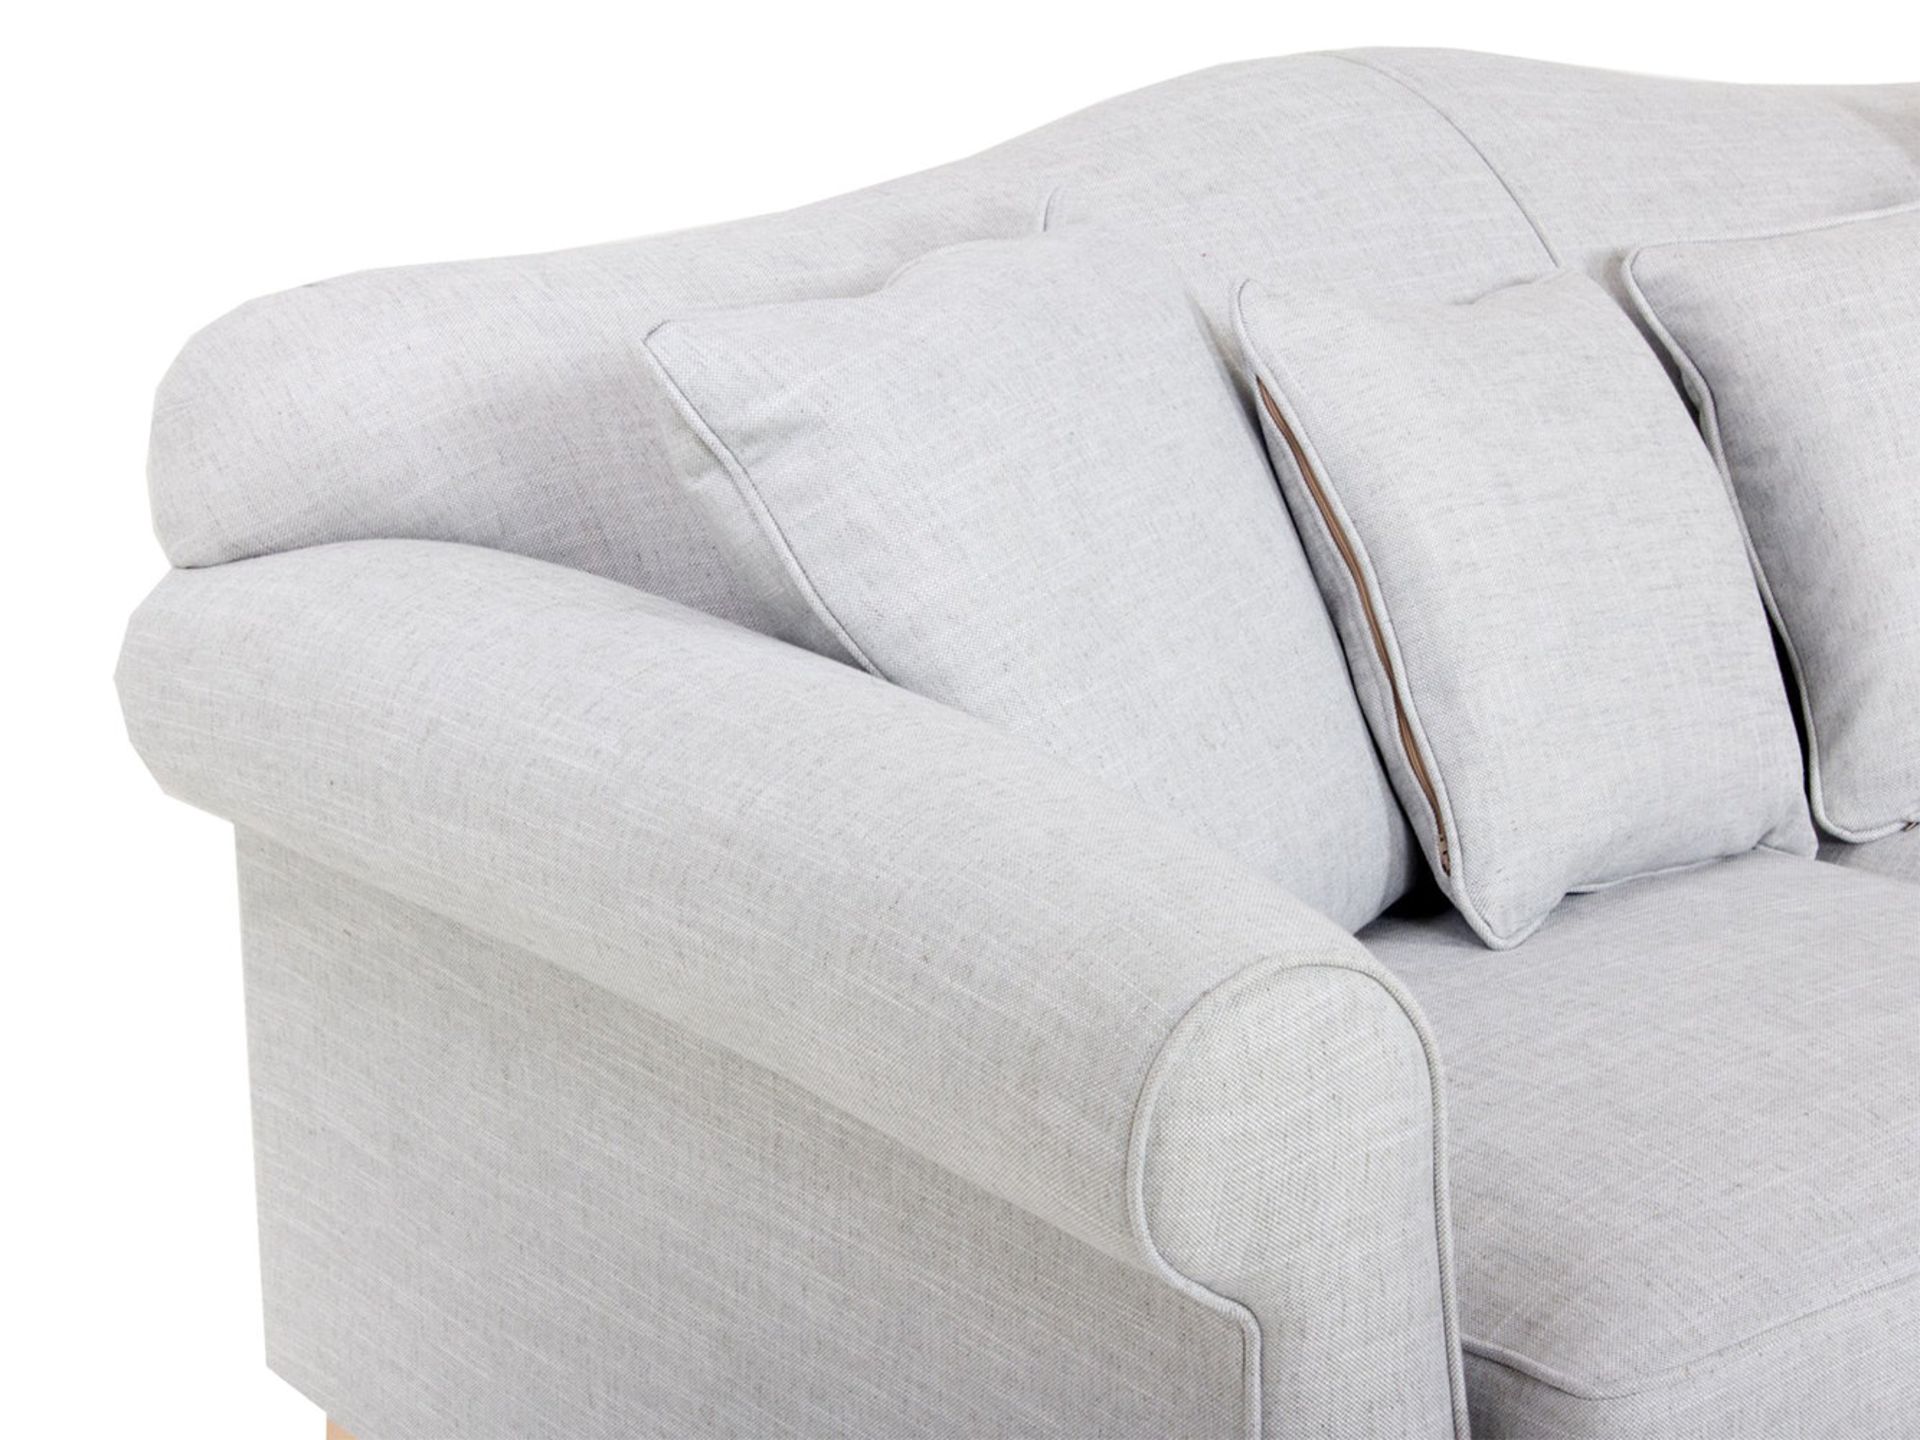 1 x Guilgud Sofa by Brewers Home - Ice White Upholstery - RRP £1,389! - Image 5 of 6